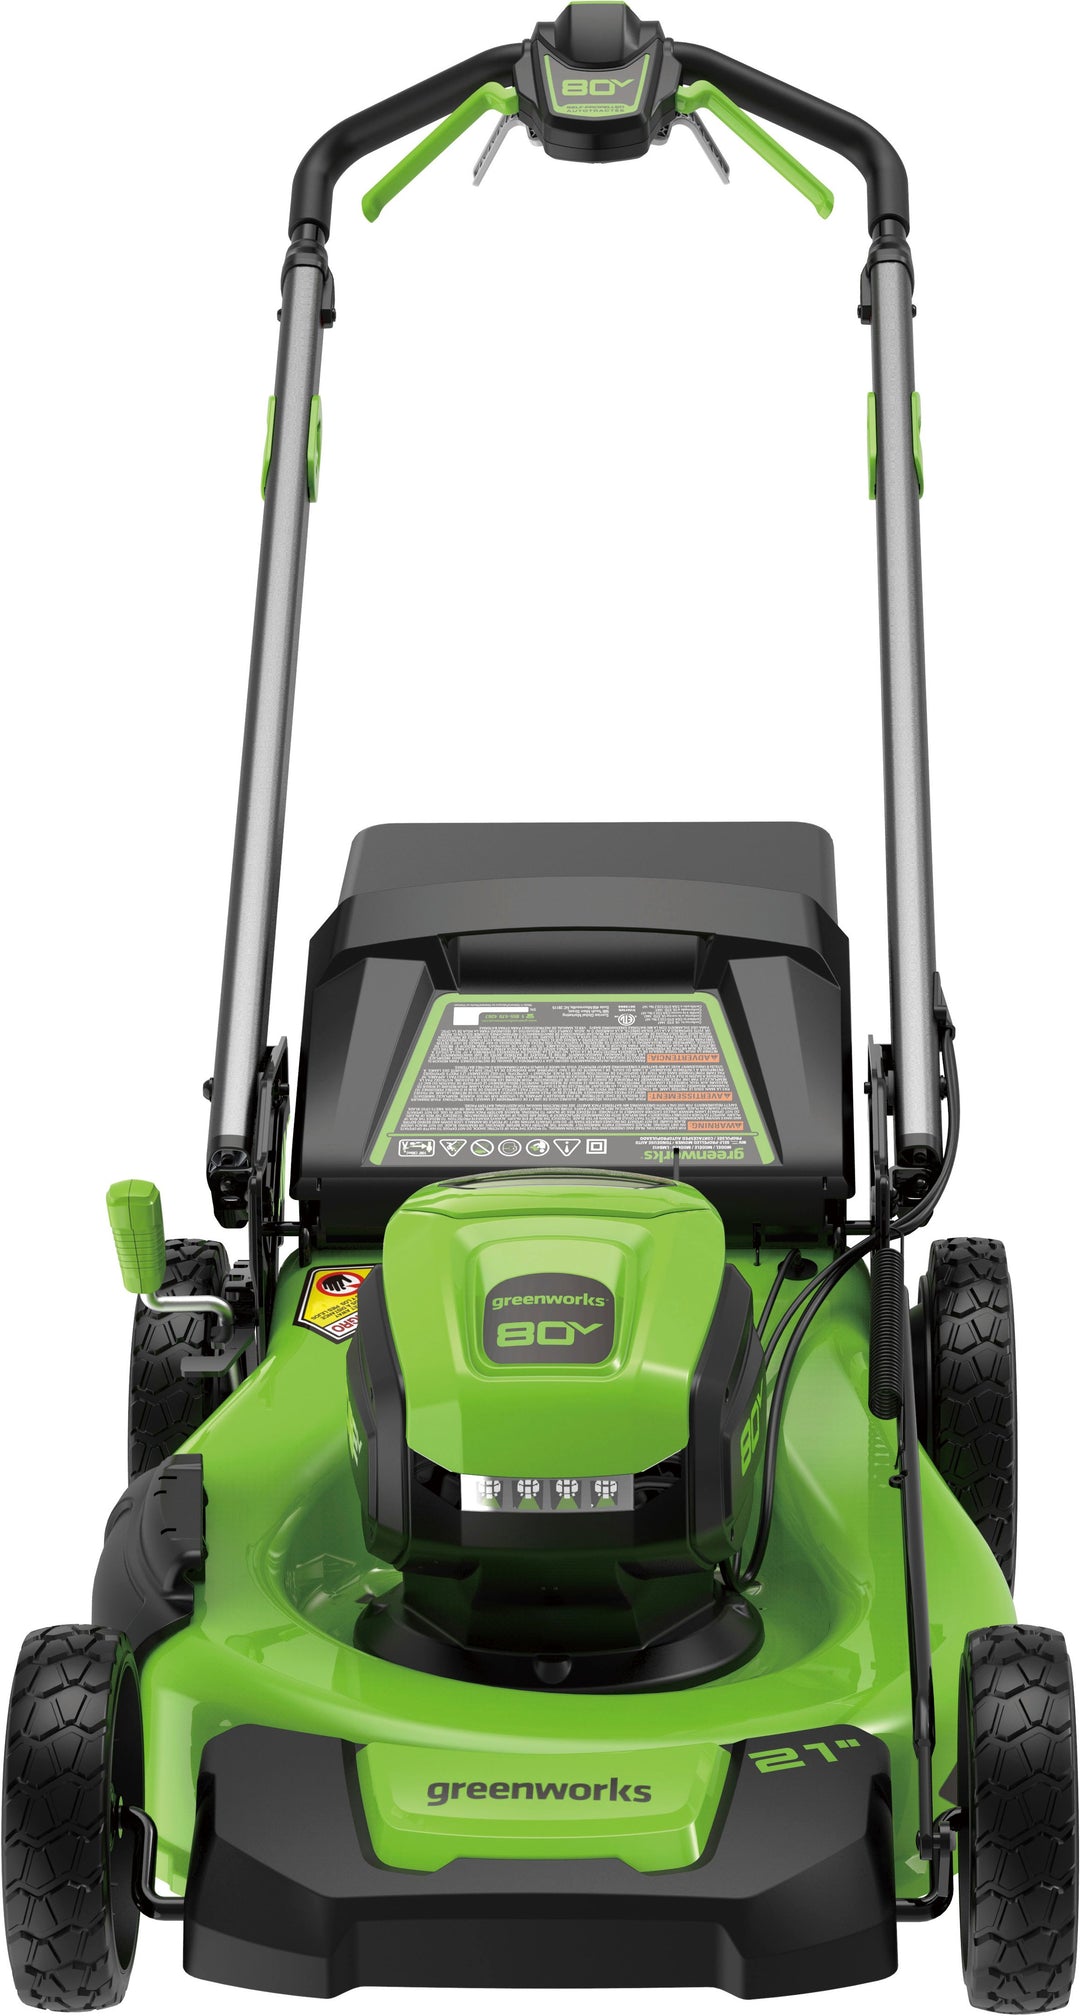 Greenworks - 80 Volt 21-Inch Self-Propelled Lawn Mower (1 x 4.0Ah Battery and 1 x Charger) - Green_2